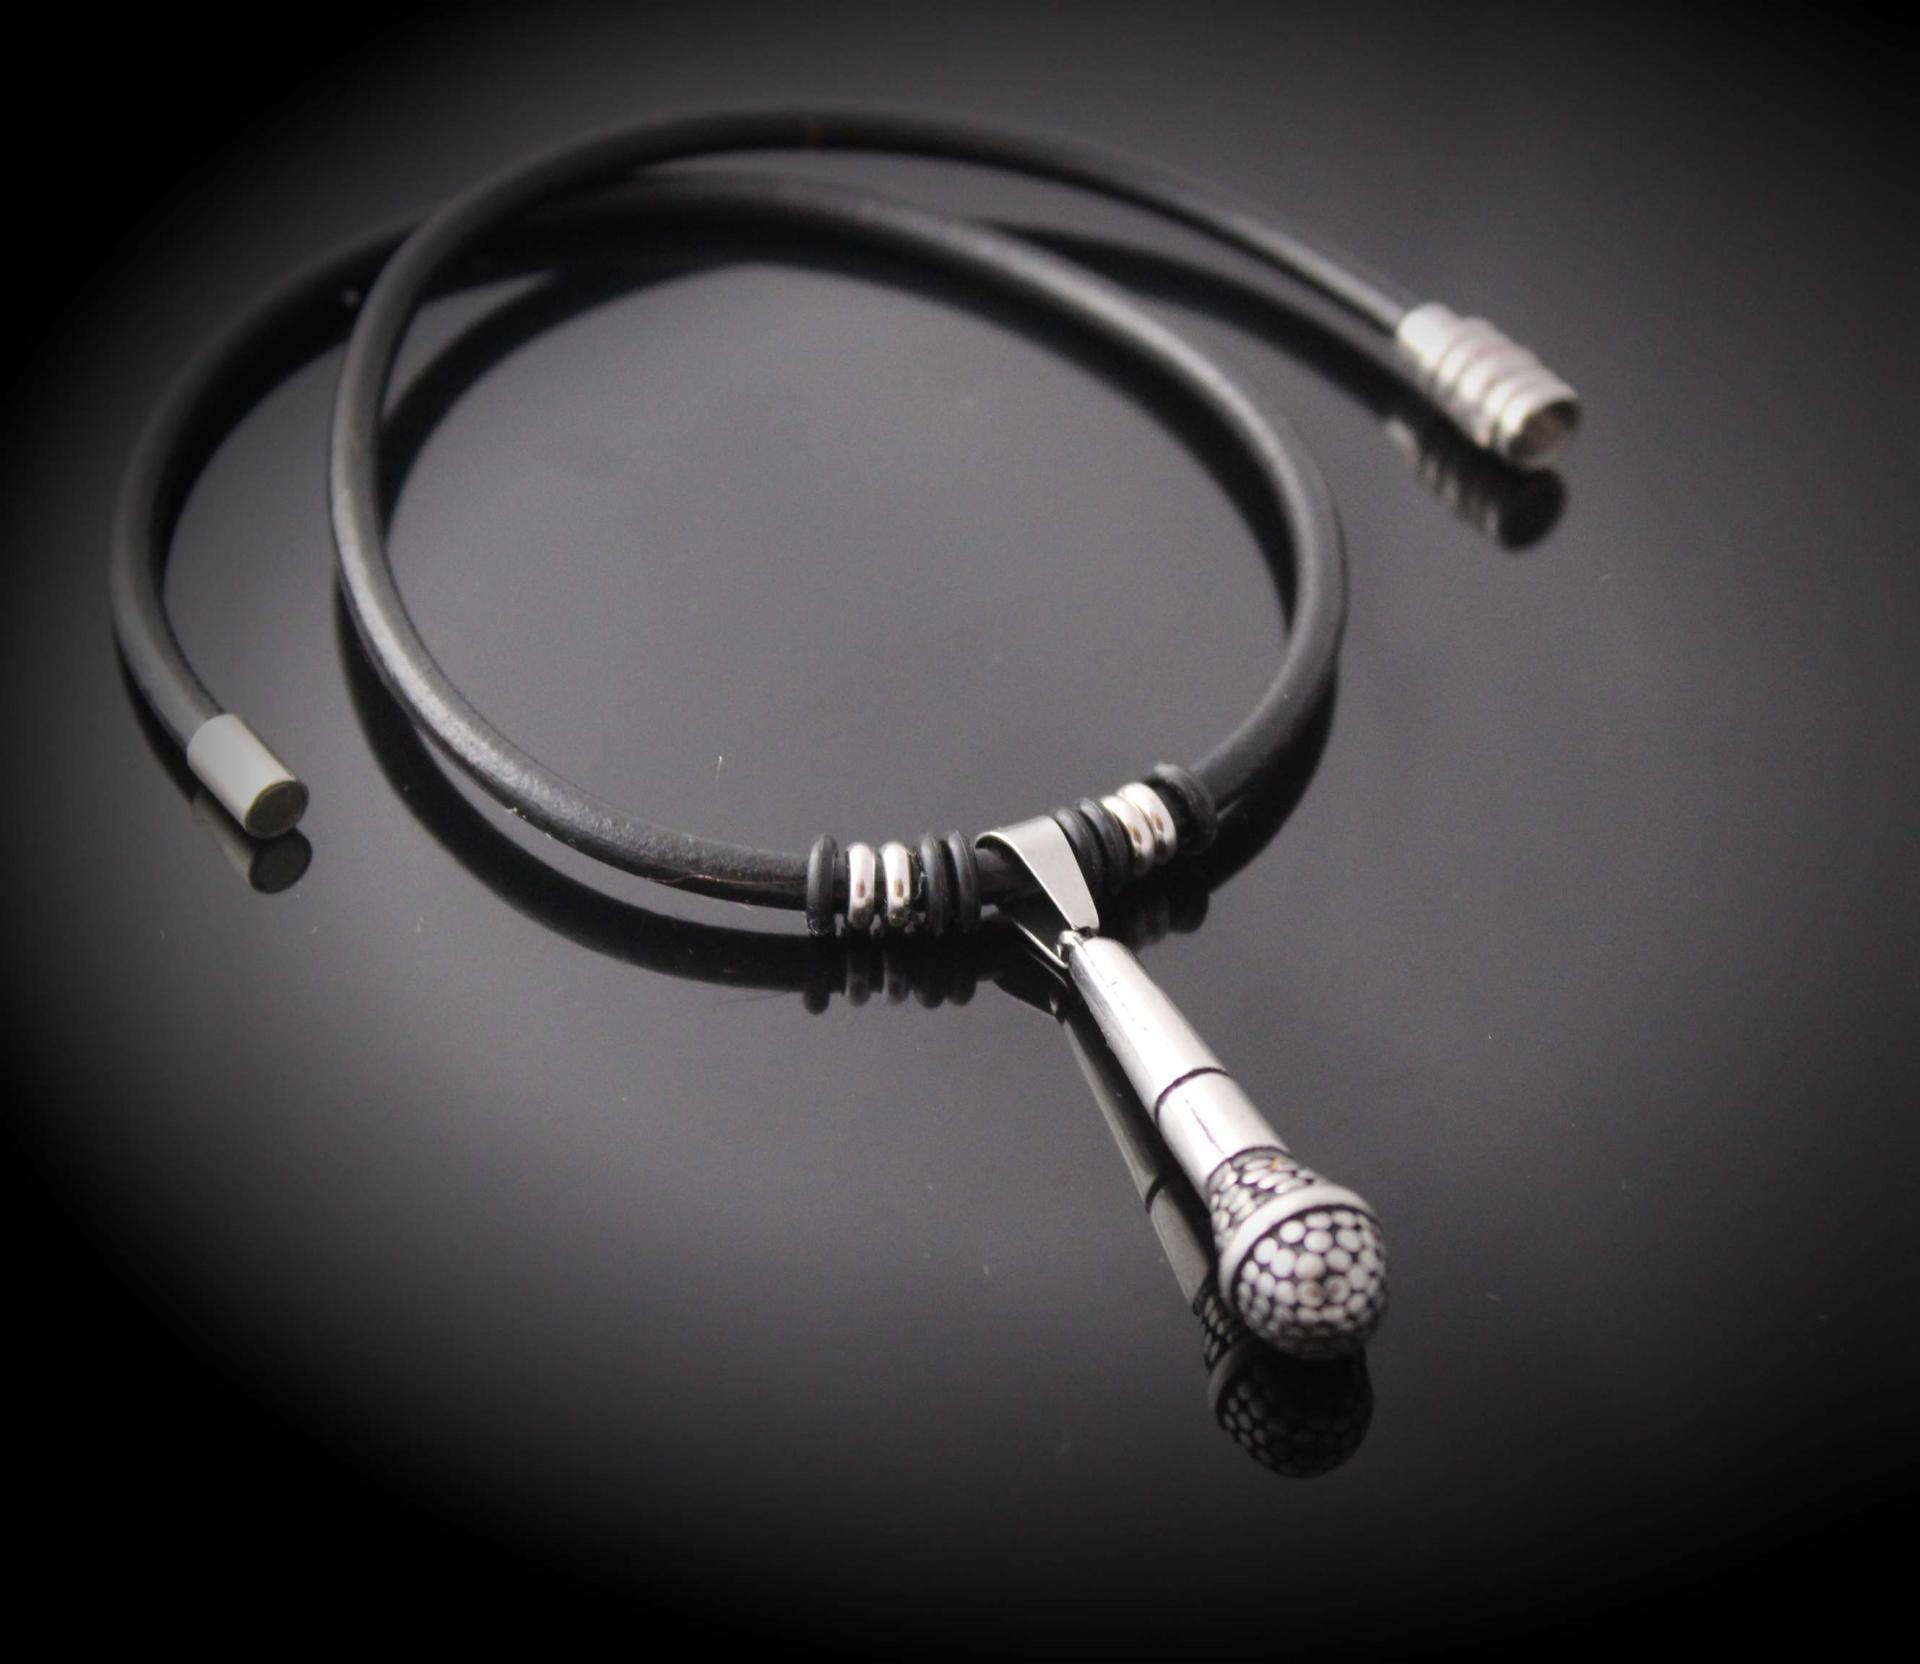 Microphone Pendant Choker Necklace in Leather and Stainless Steel